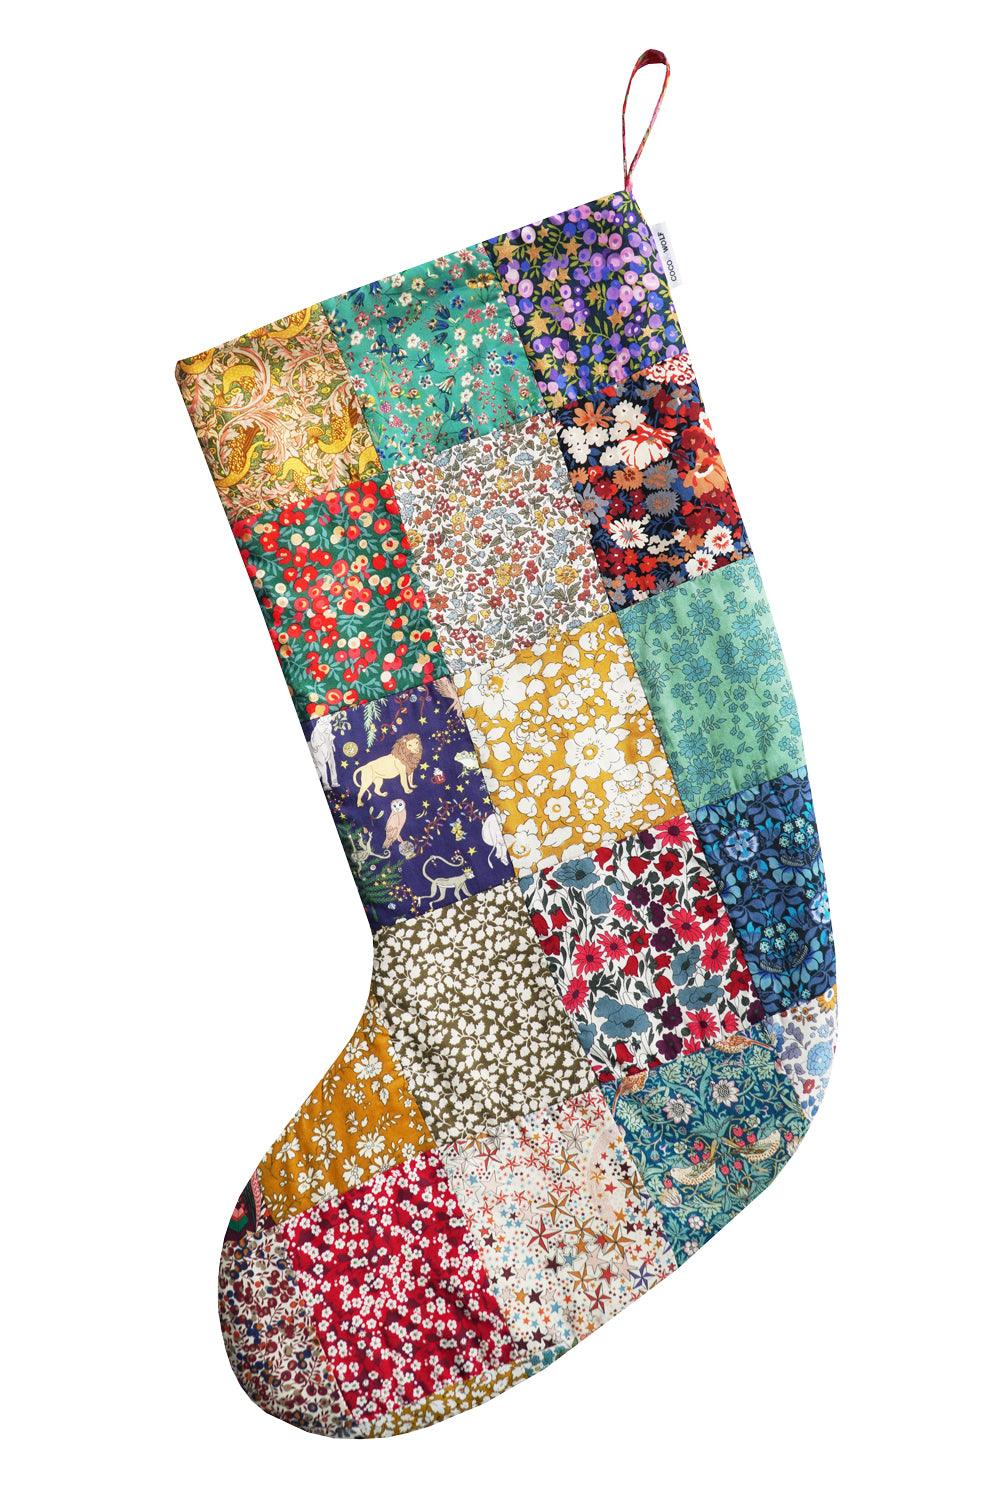 Patchwork Christmas Stocking made with Liberty Fabric - Coco & Wolf